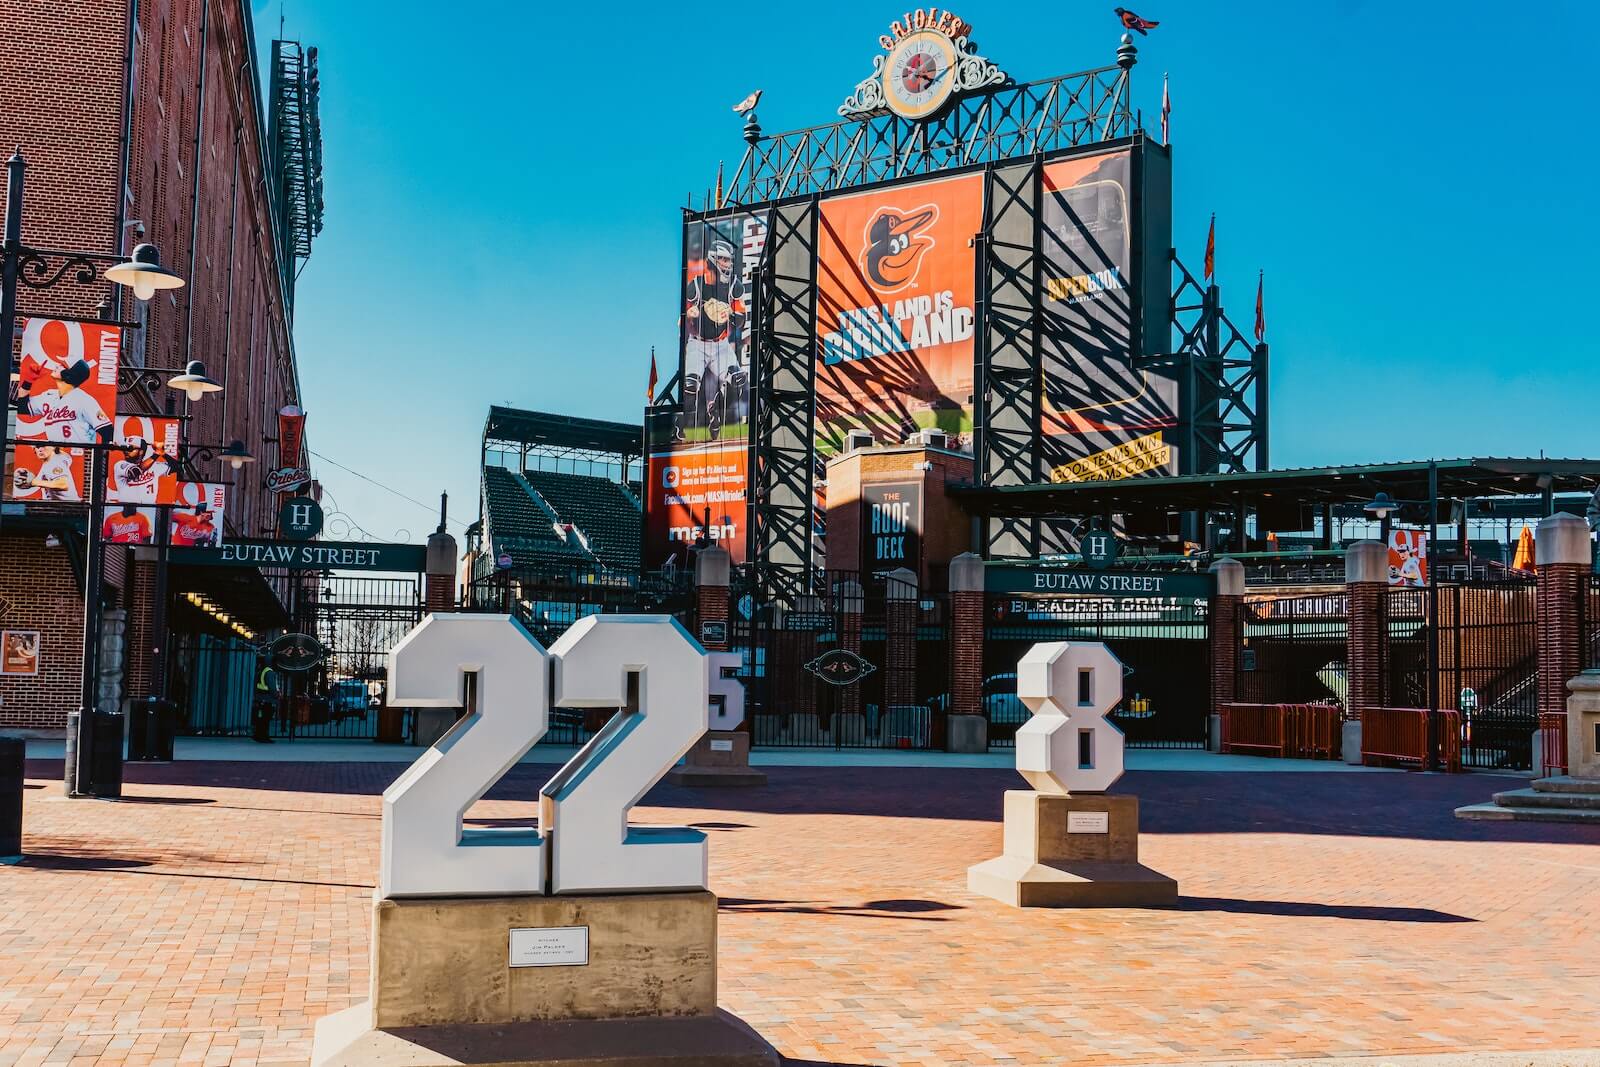 Best Orioles Players Of All Time: Top 5 Baltimore Athletes, According To Fans